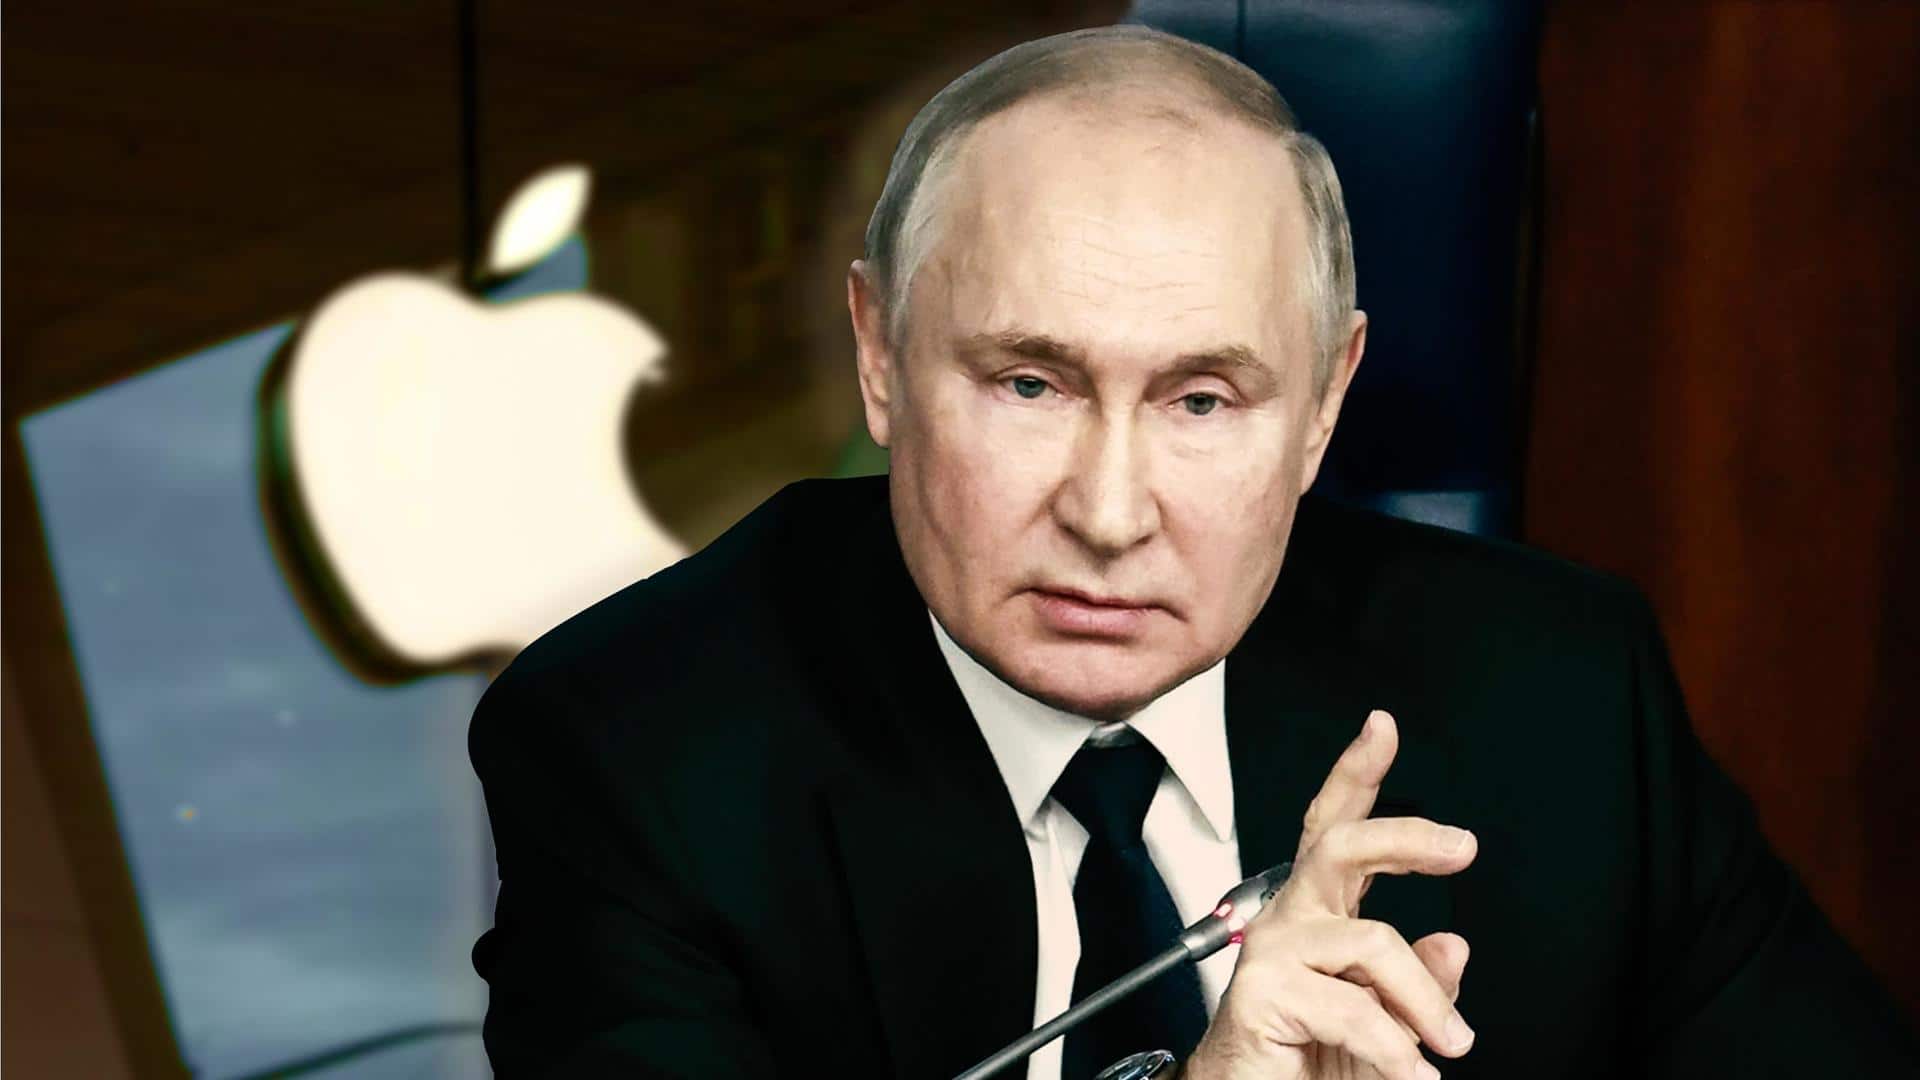 Russia claims US intelligence hacked thousands of iPhones